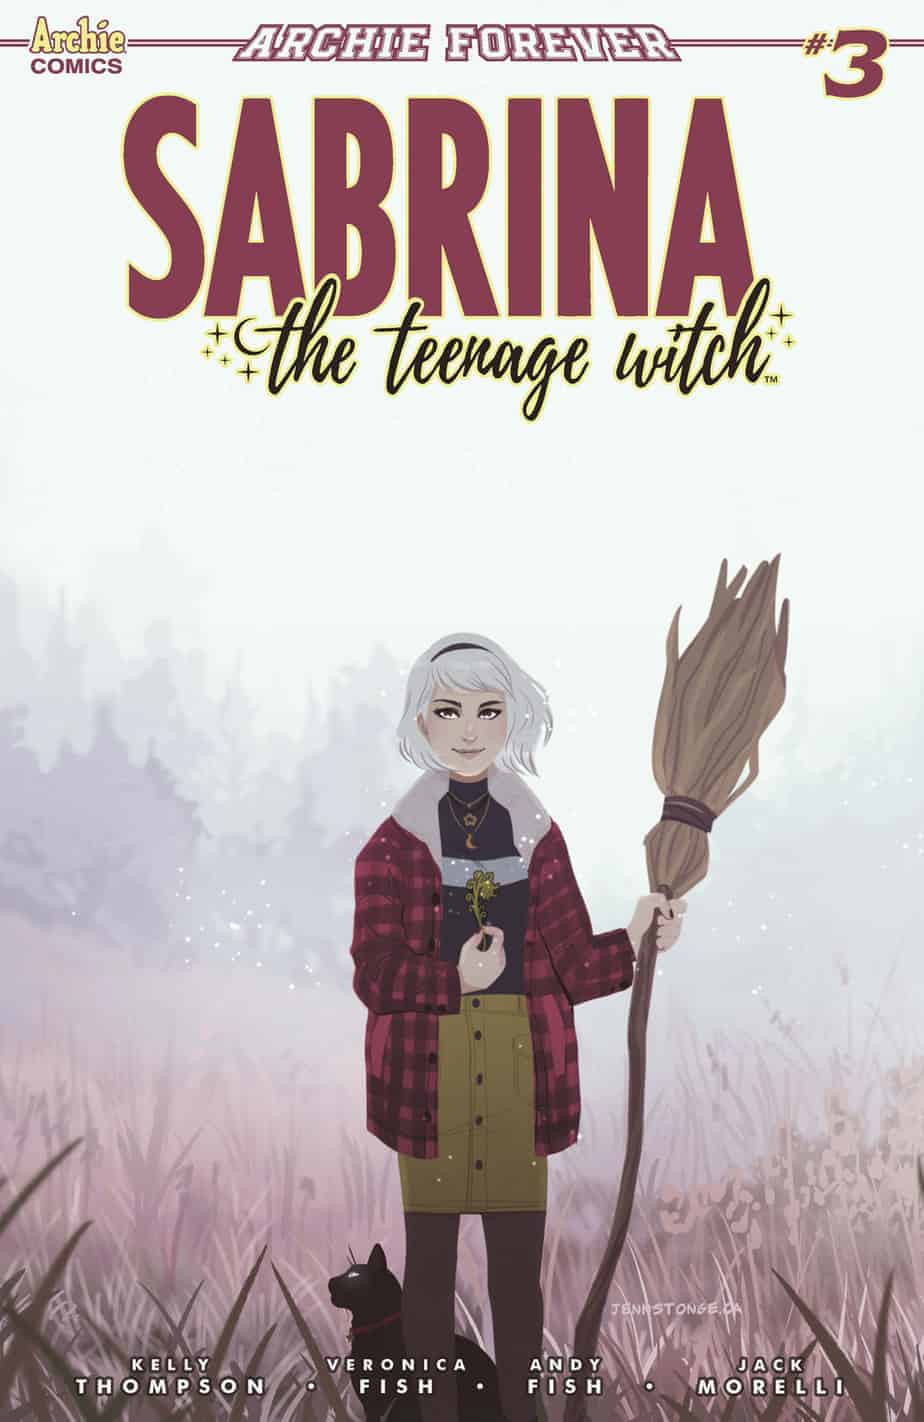 SABRINA THE TEENAGE WITCH #3 - Variant Cover by Jenn St.-Onge